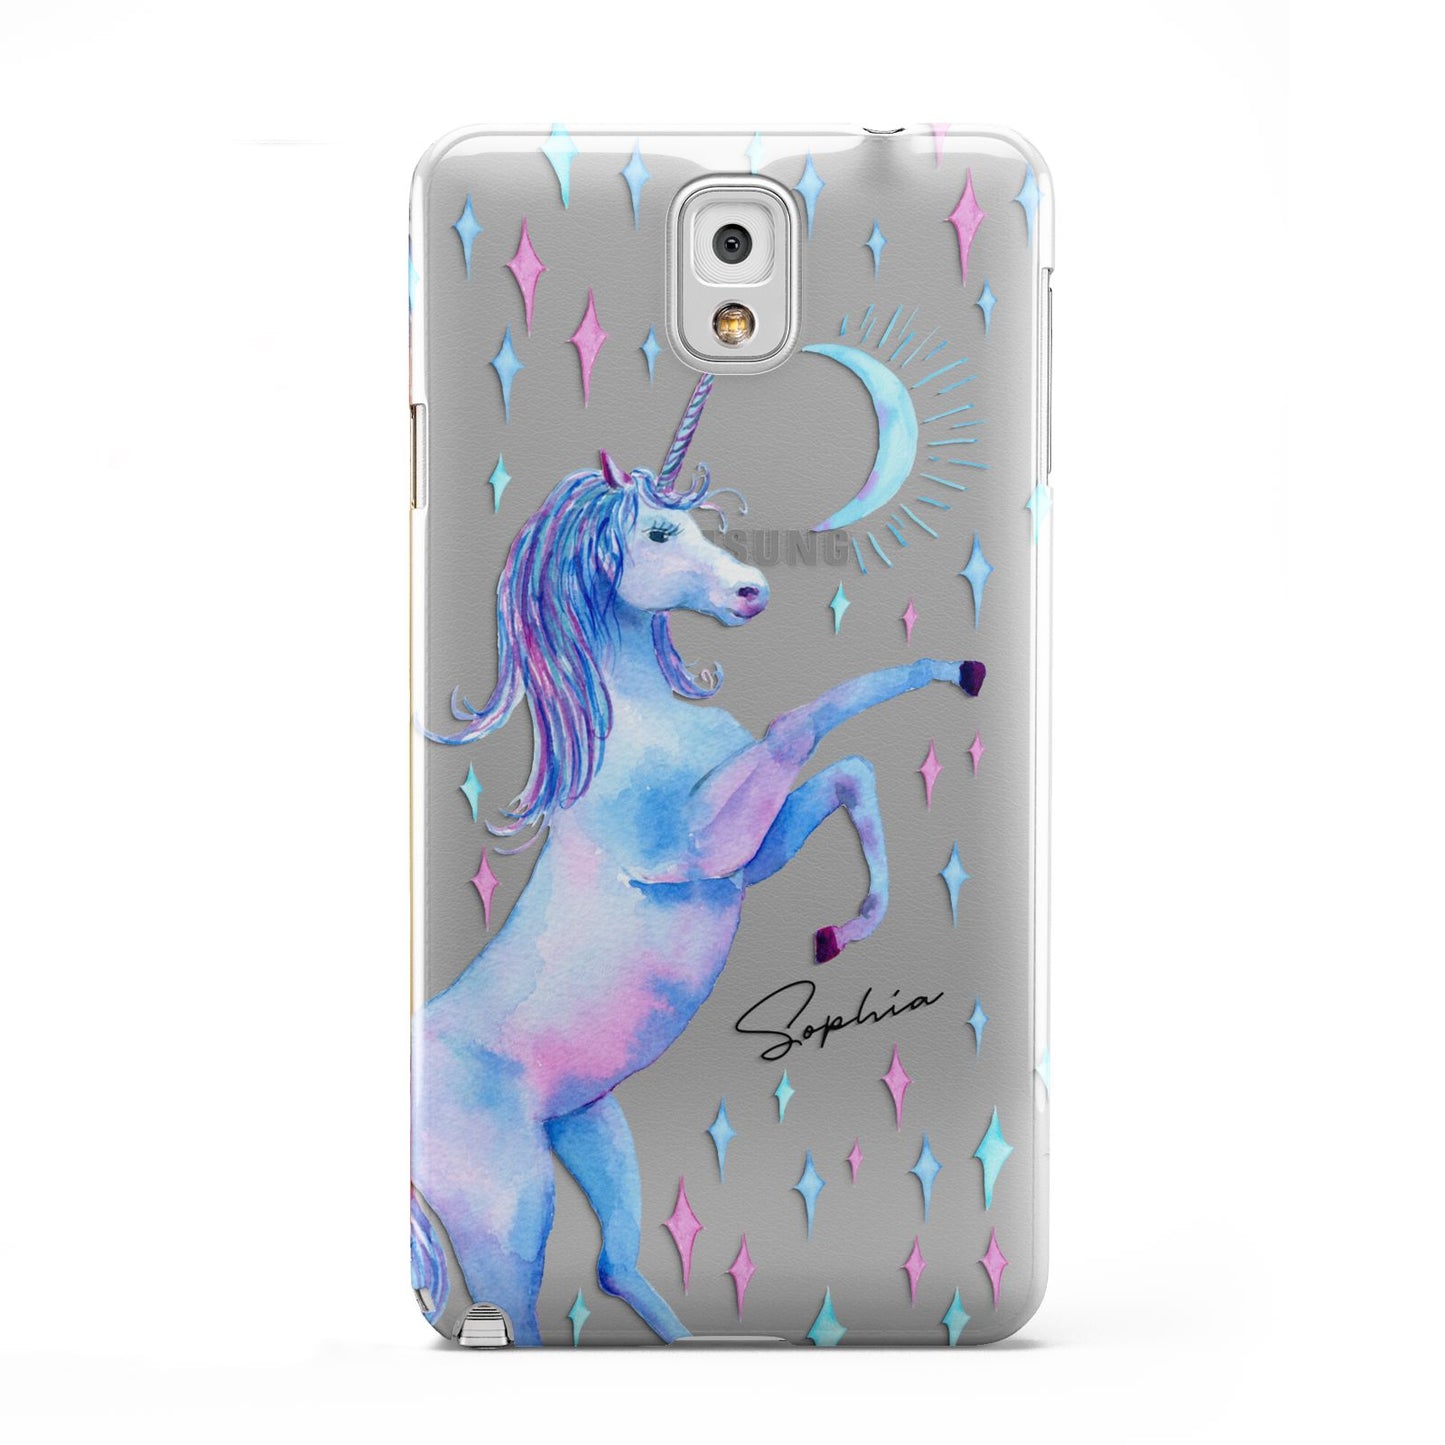 Personalised Unicorn Name Samsung Galaxy Note 3 Case